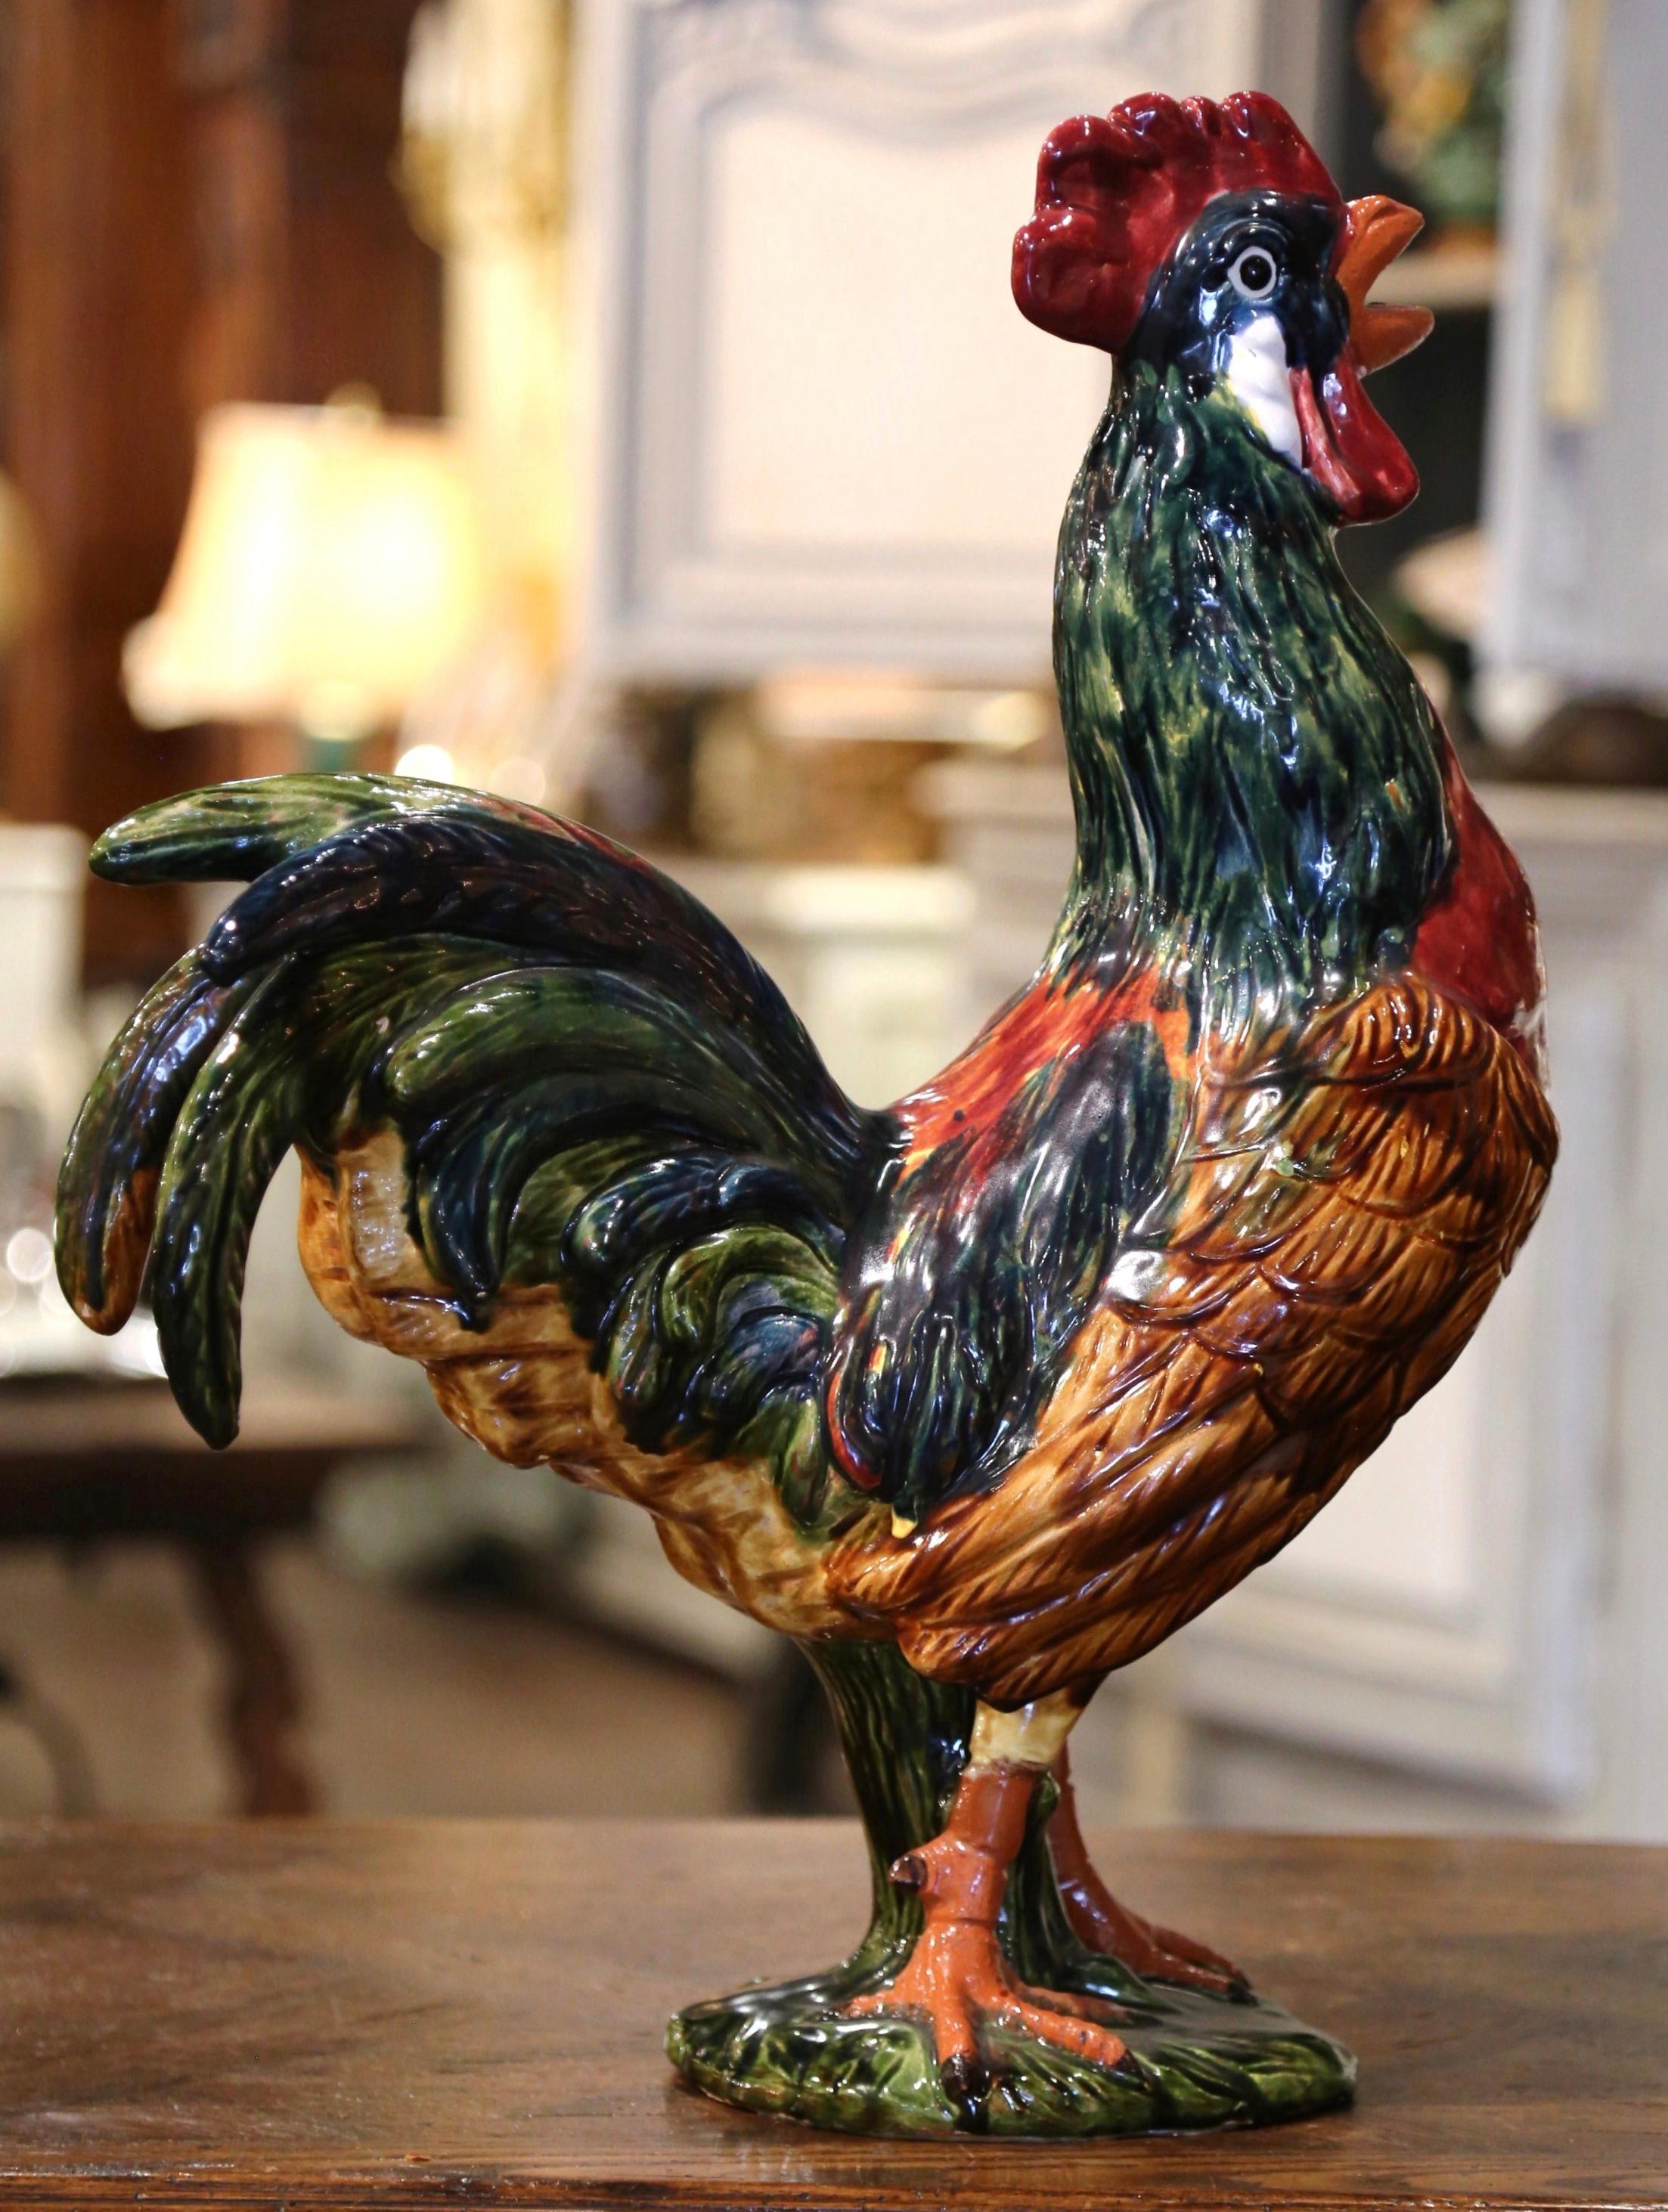 This large colorful Majolica rooster was crafted in Normandy, circa 1980. Hand painted in the blue, green and brown palette, the proud symbol of France stands tall on a green base. The ceramic sculpture is in excellent condition with rich